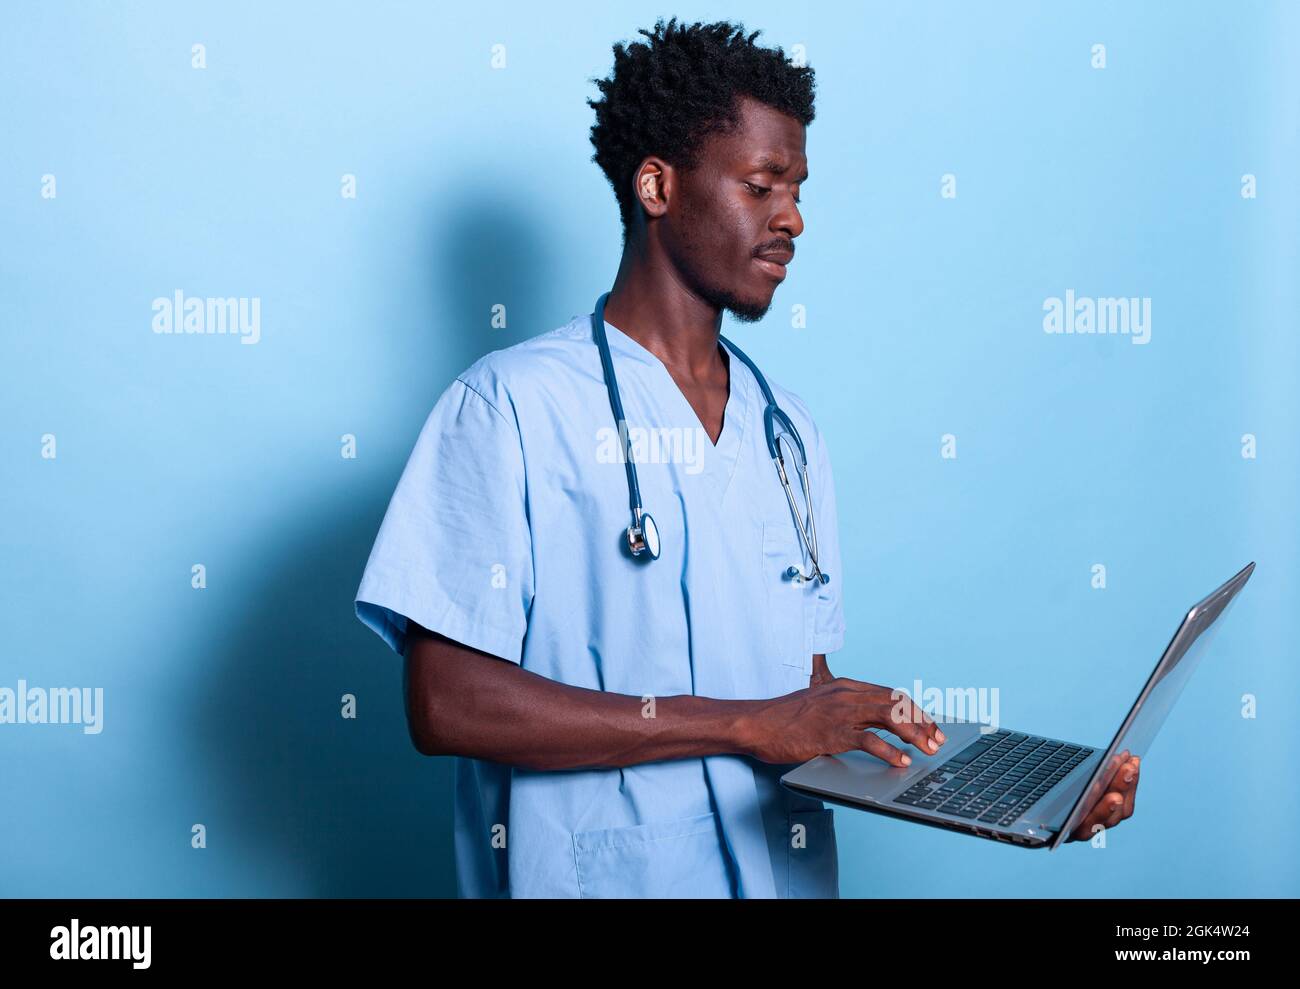 African american man nurse looking at laptop in hand. Black medical  assistant with blue uniform and stethoscope holding modern device, standing  over isolated background. Healthcare specialist Stock Photo - Alamy